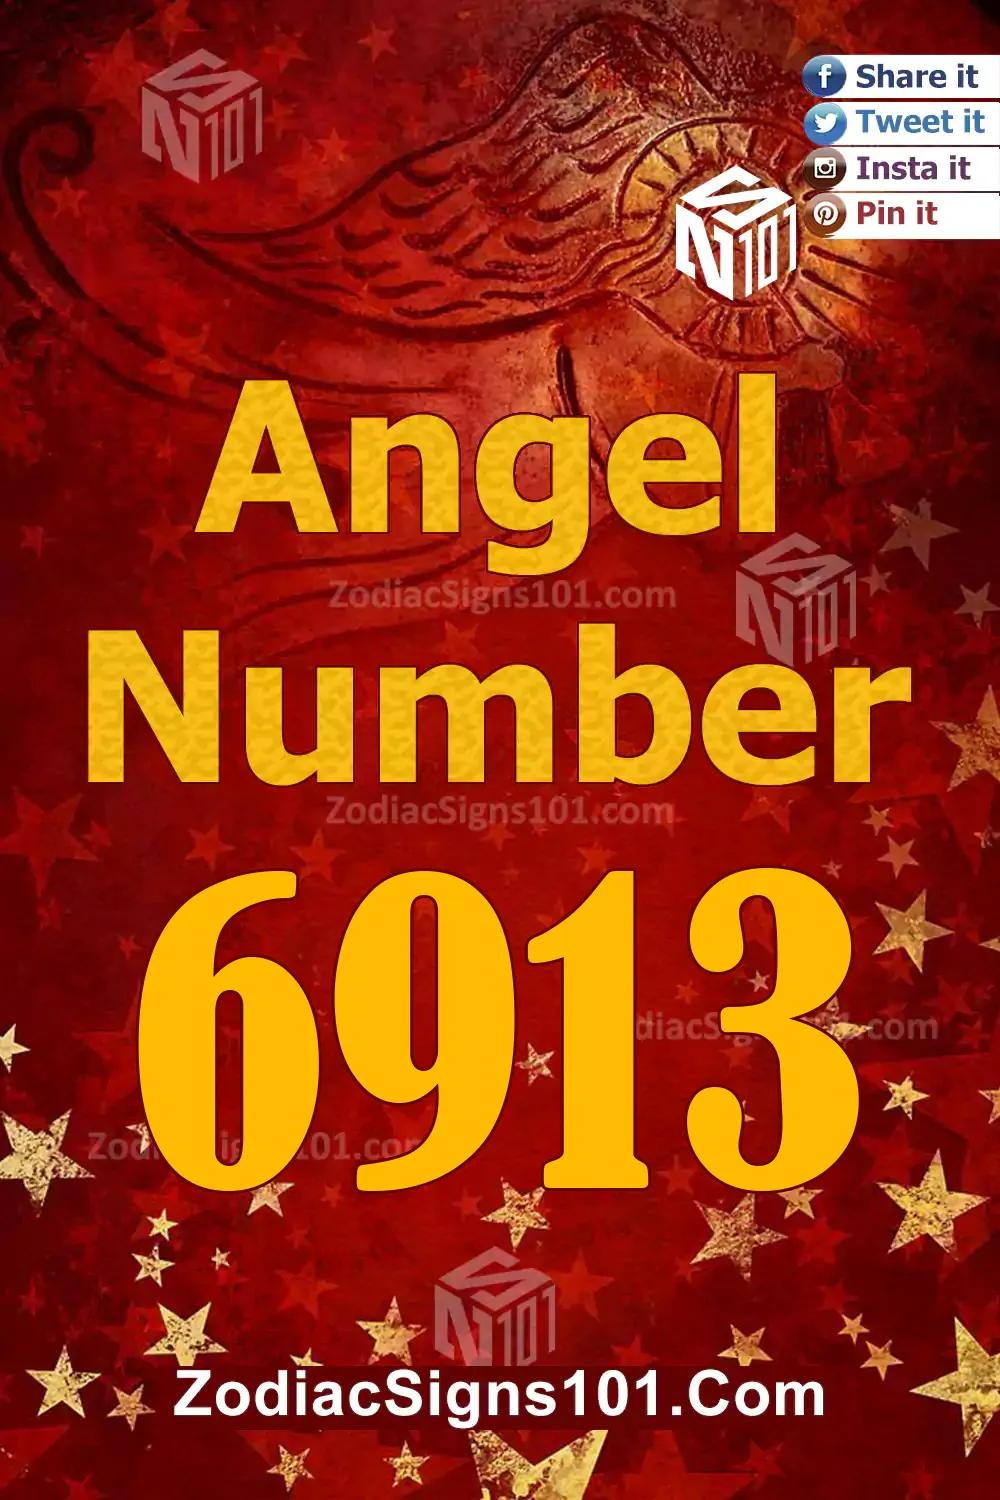 6913 Angel Number Meaning